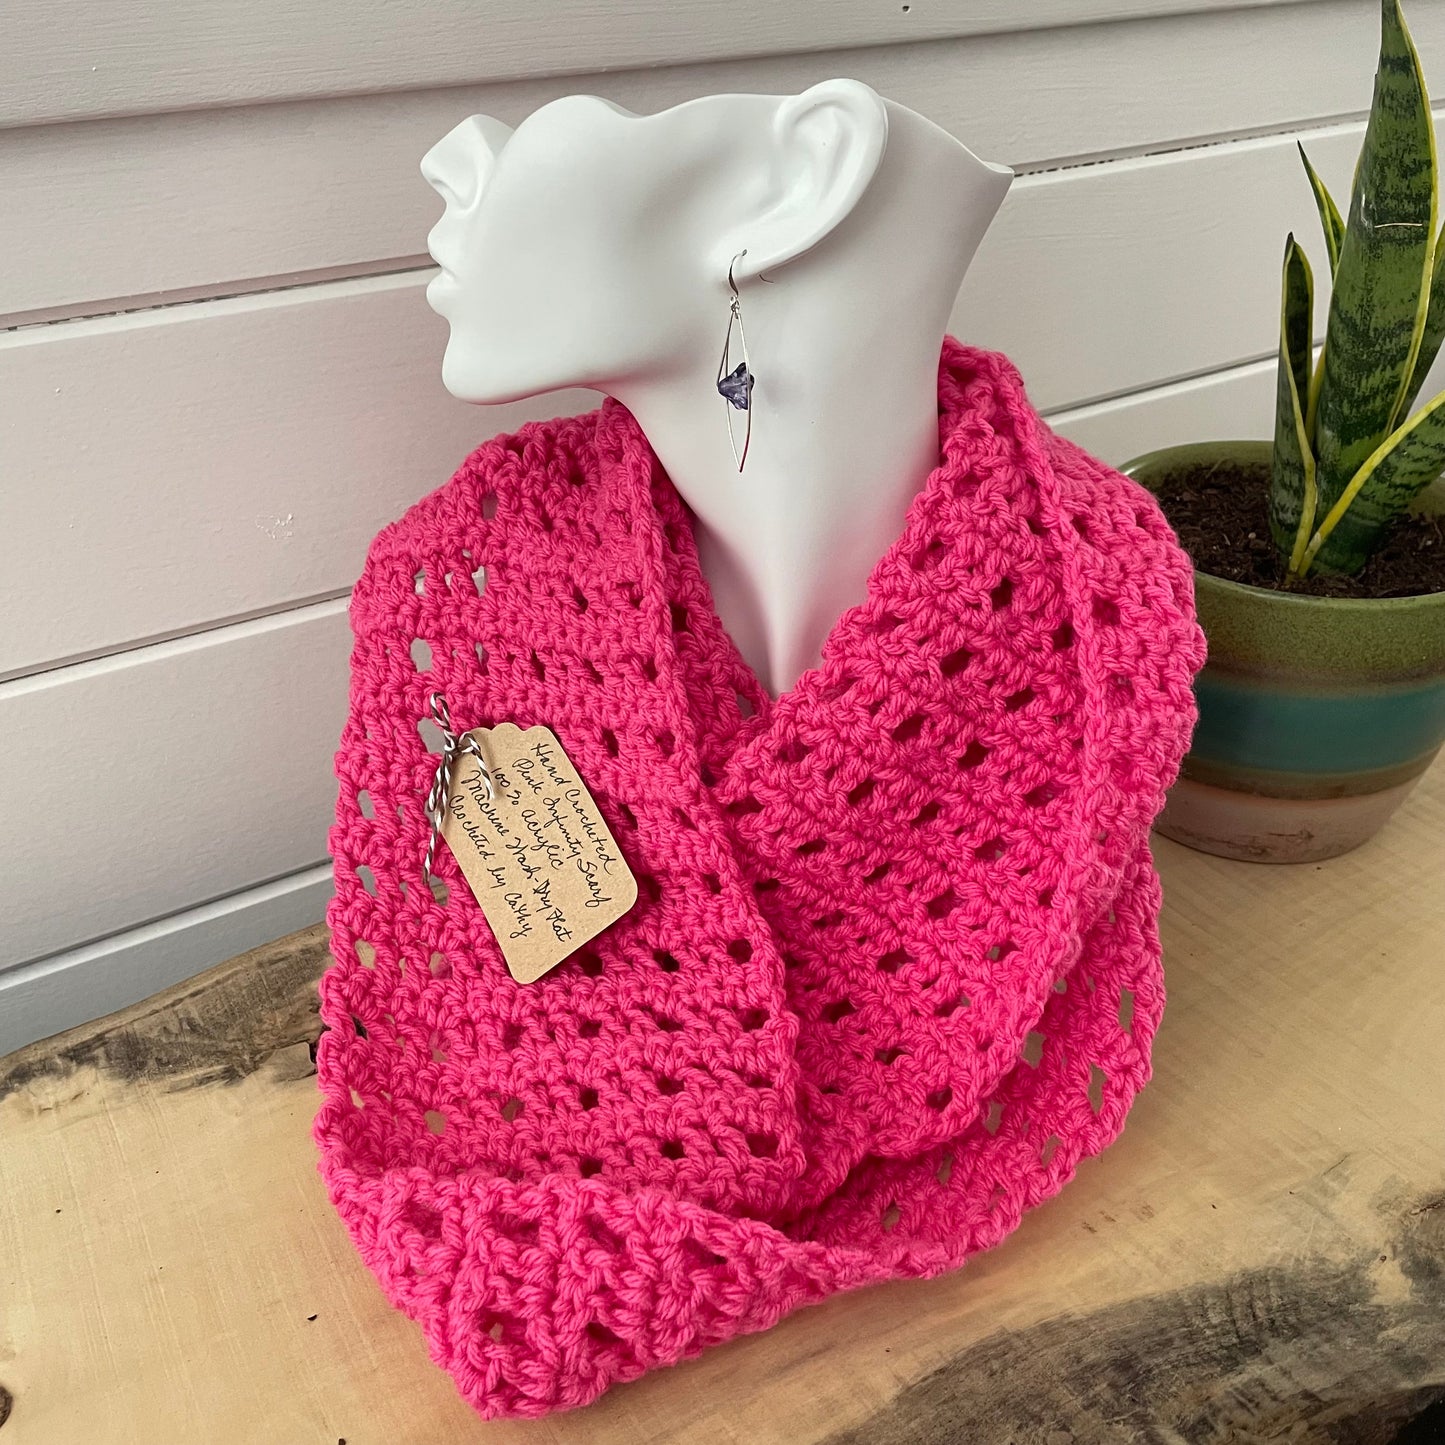 Neon Pink Infinity Scarf Crochet Knit Spring Fall Winter Hand Crafted Color Pop Retro Vintage Style